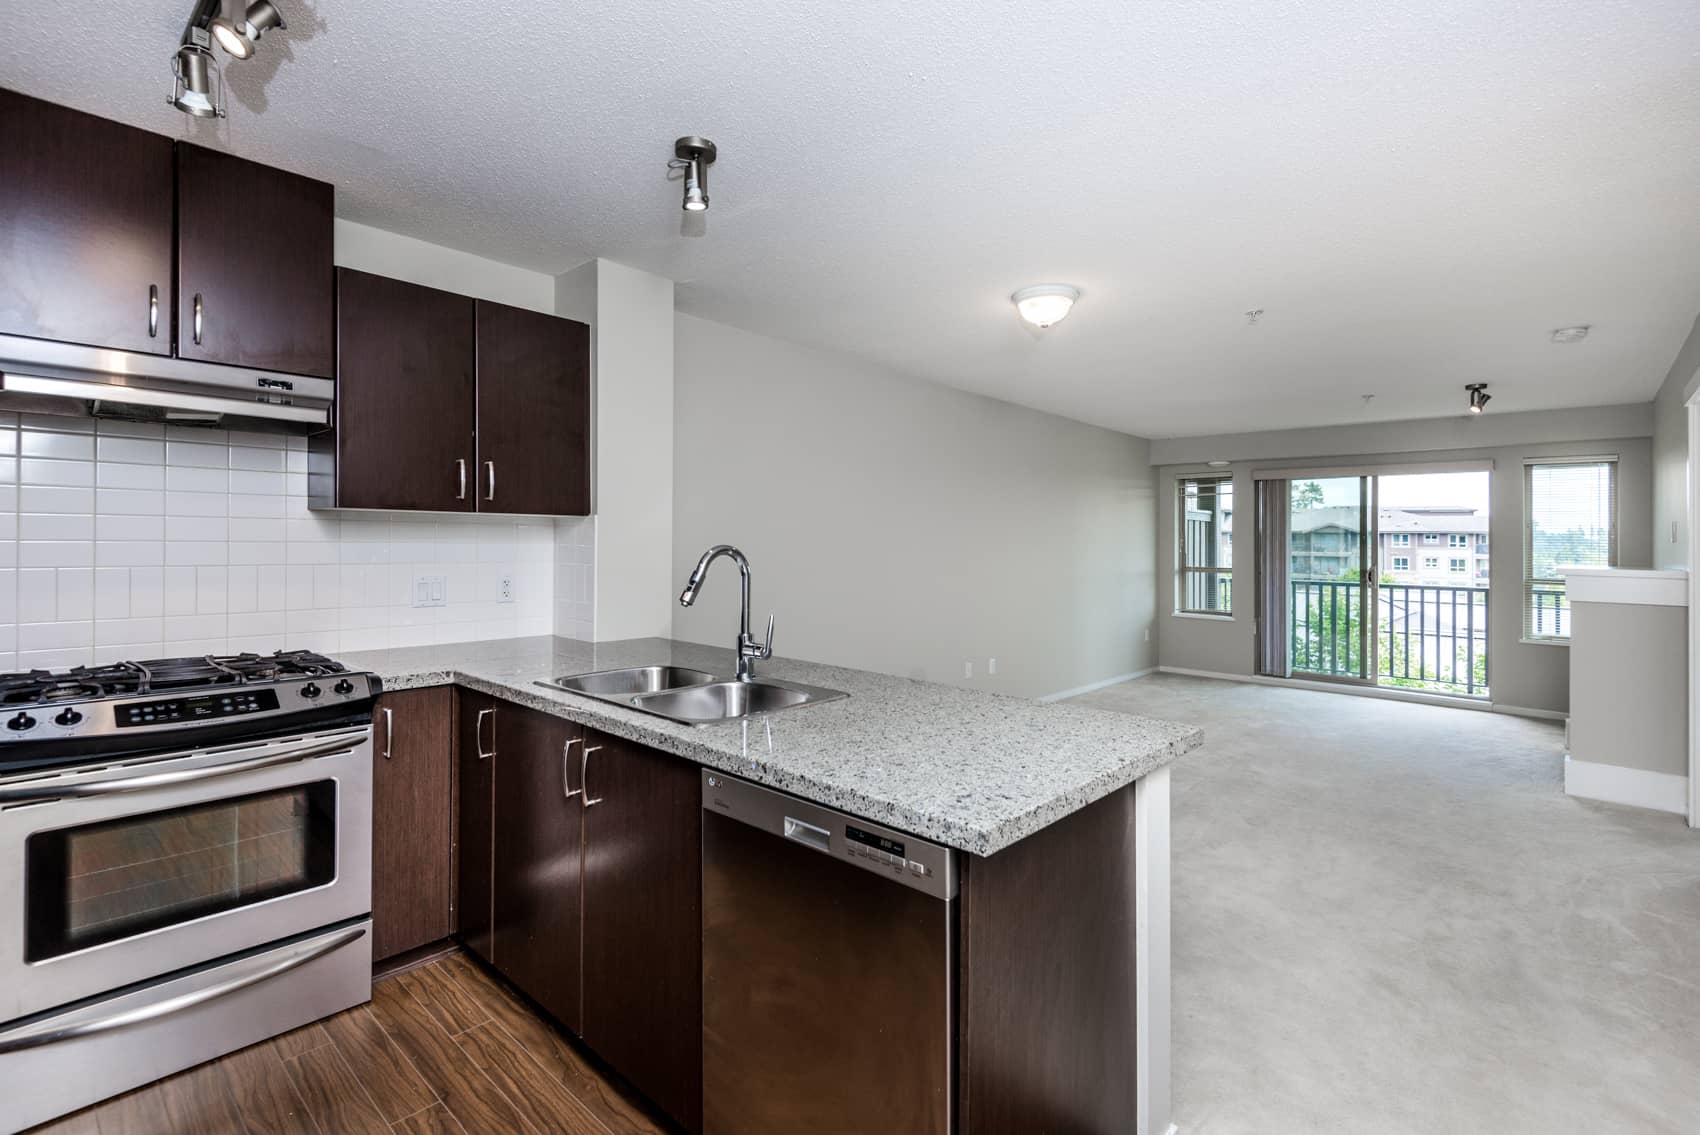 2 Bed Condo at Dayanee Springs in Coquitlam